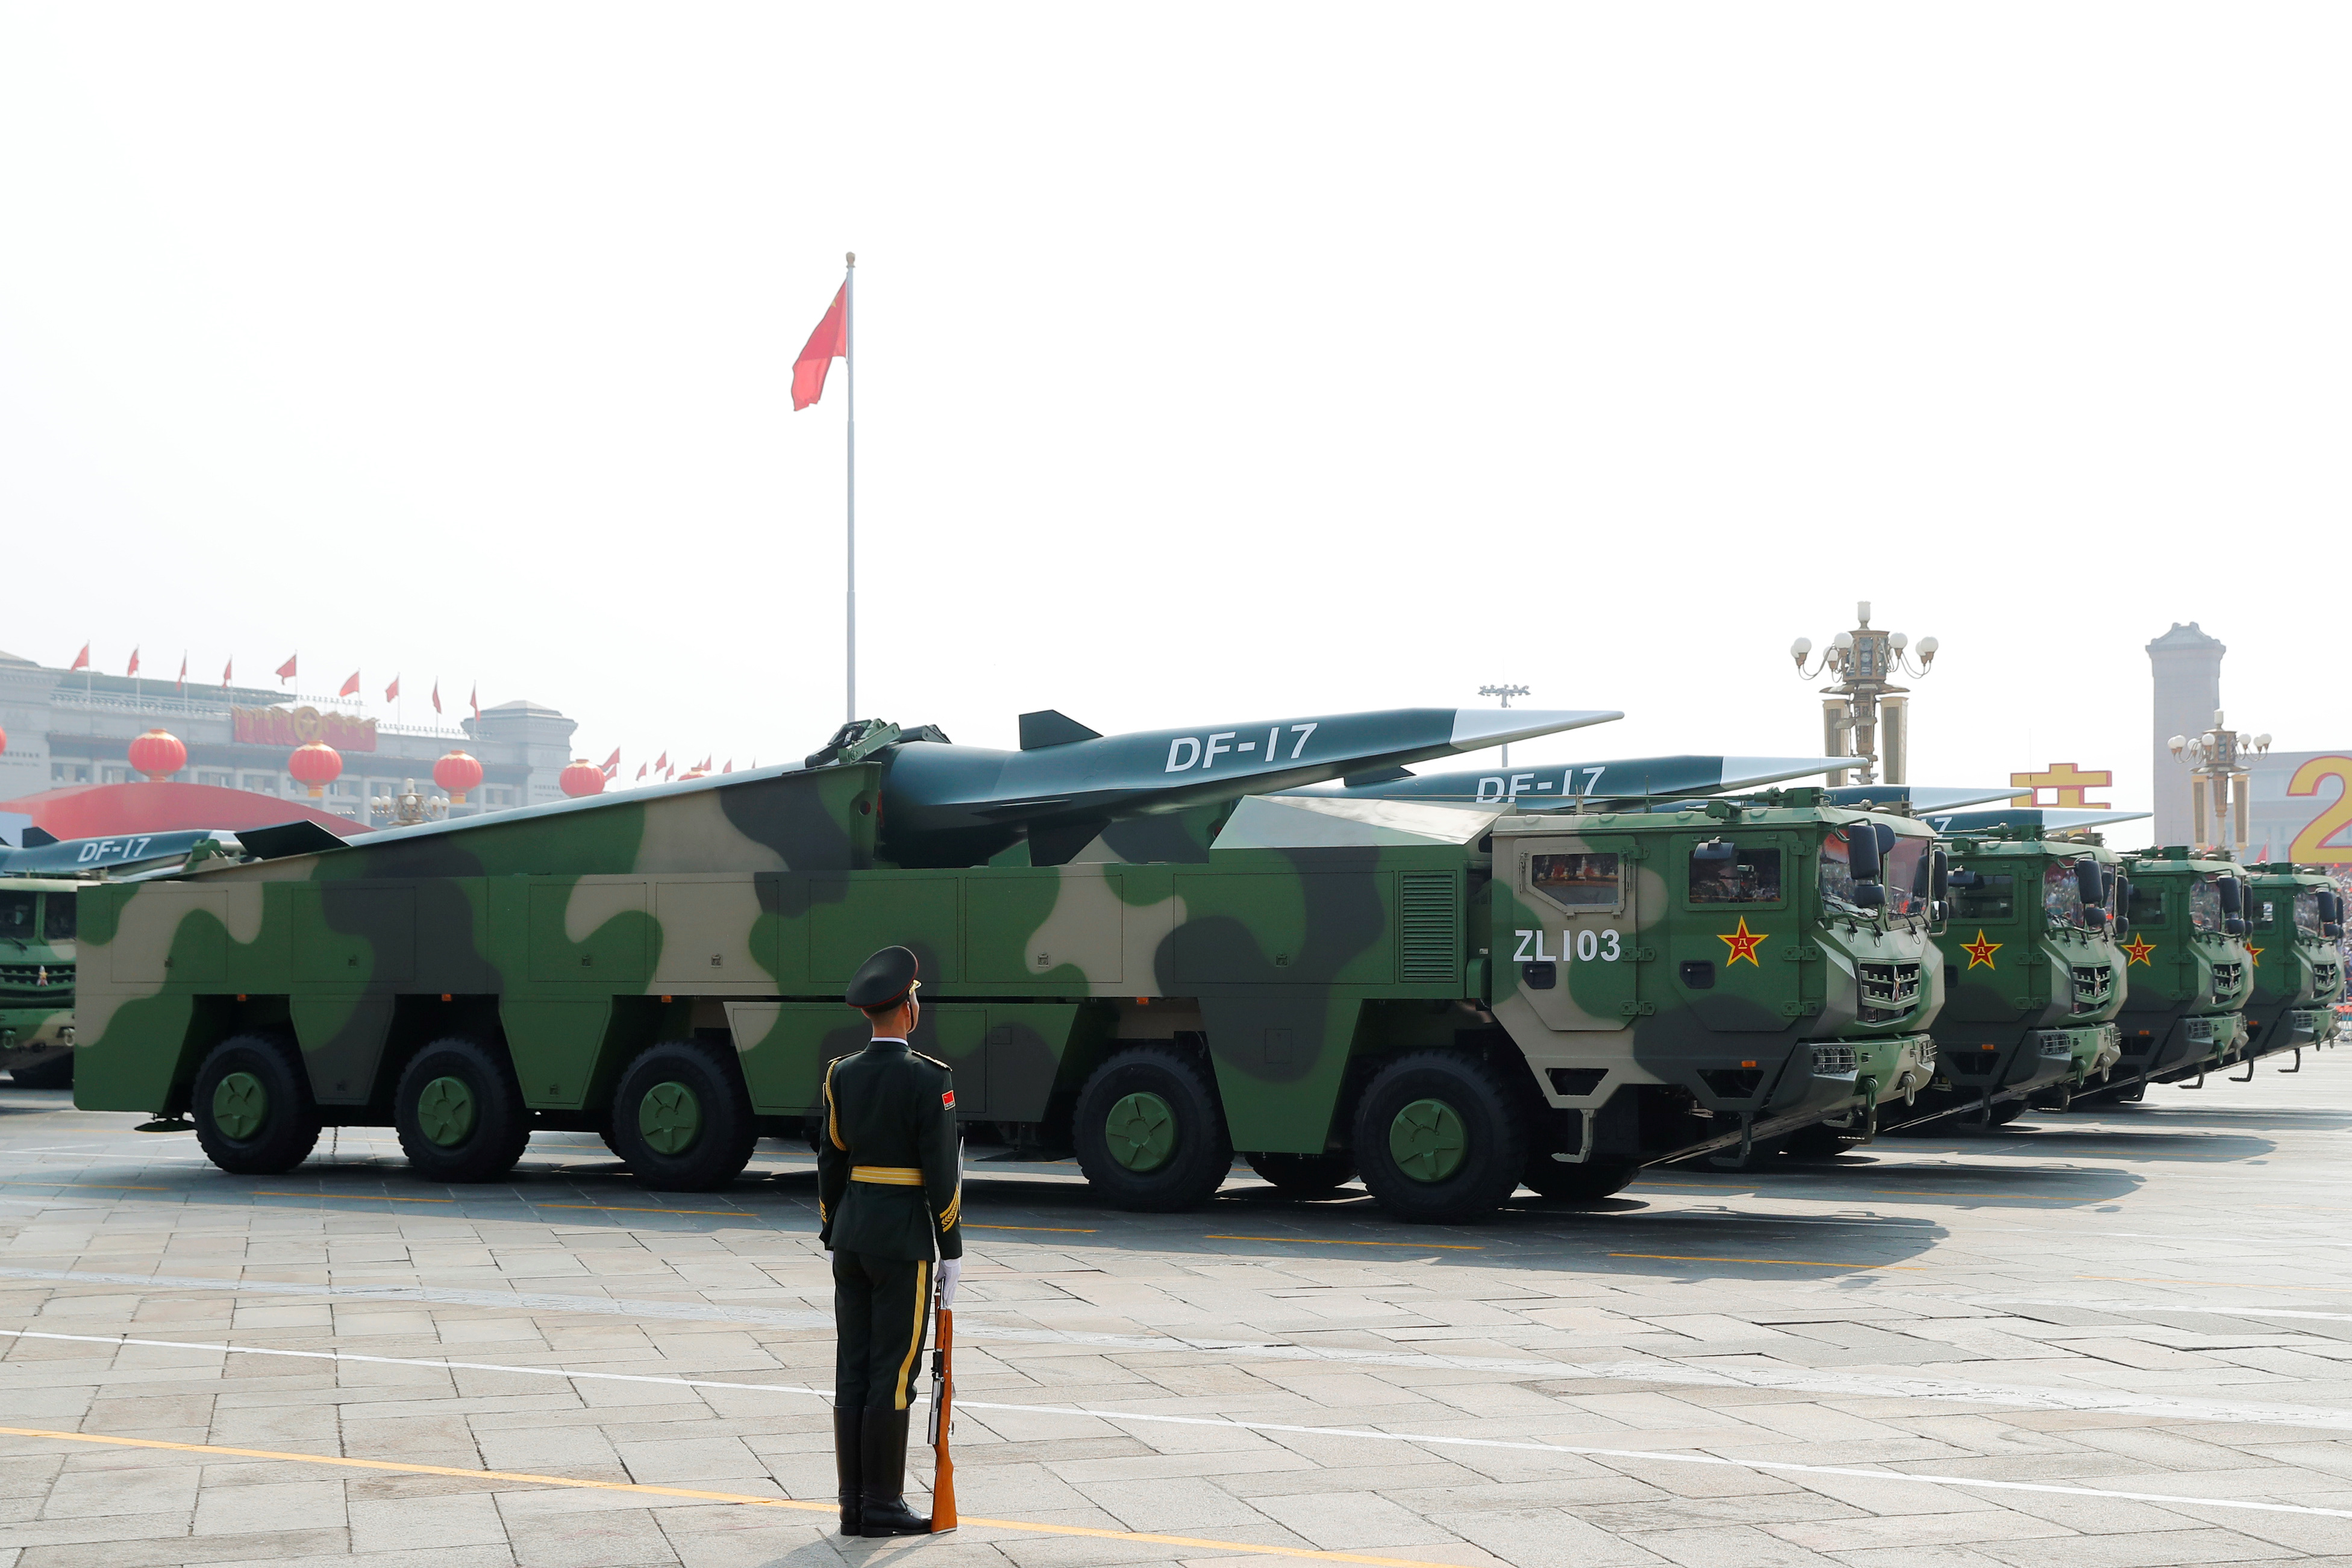 Military vehicles carrying hypersonic missiles DF-17 drive past Tiananmen Square during the military parade marking the 70th founding anniversary of People's Republic of China in Beijing